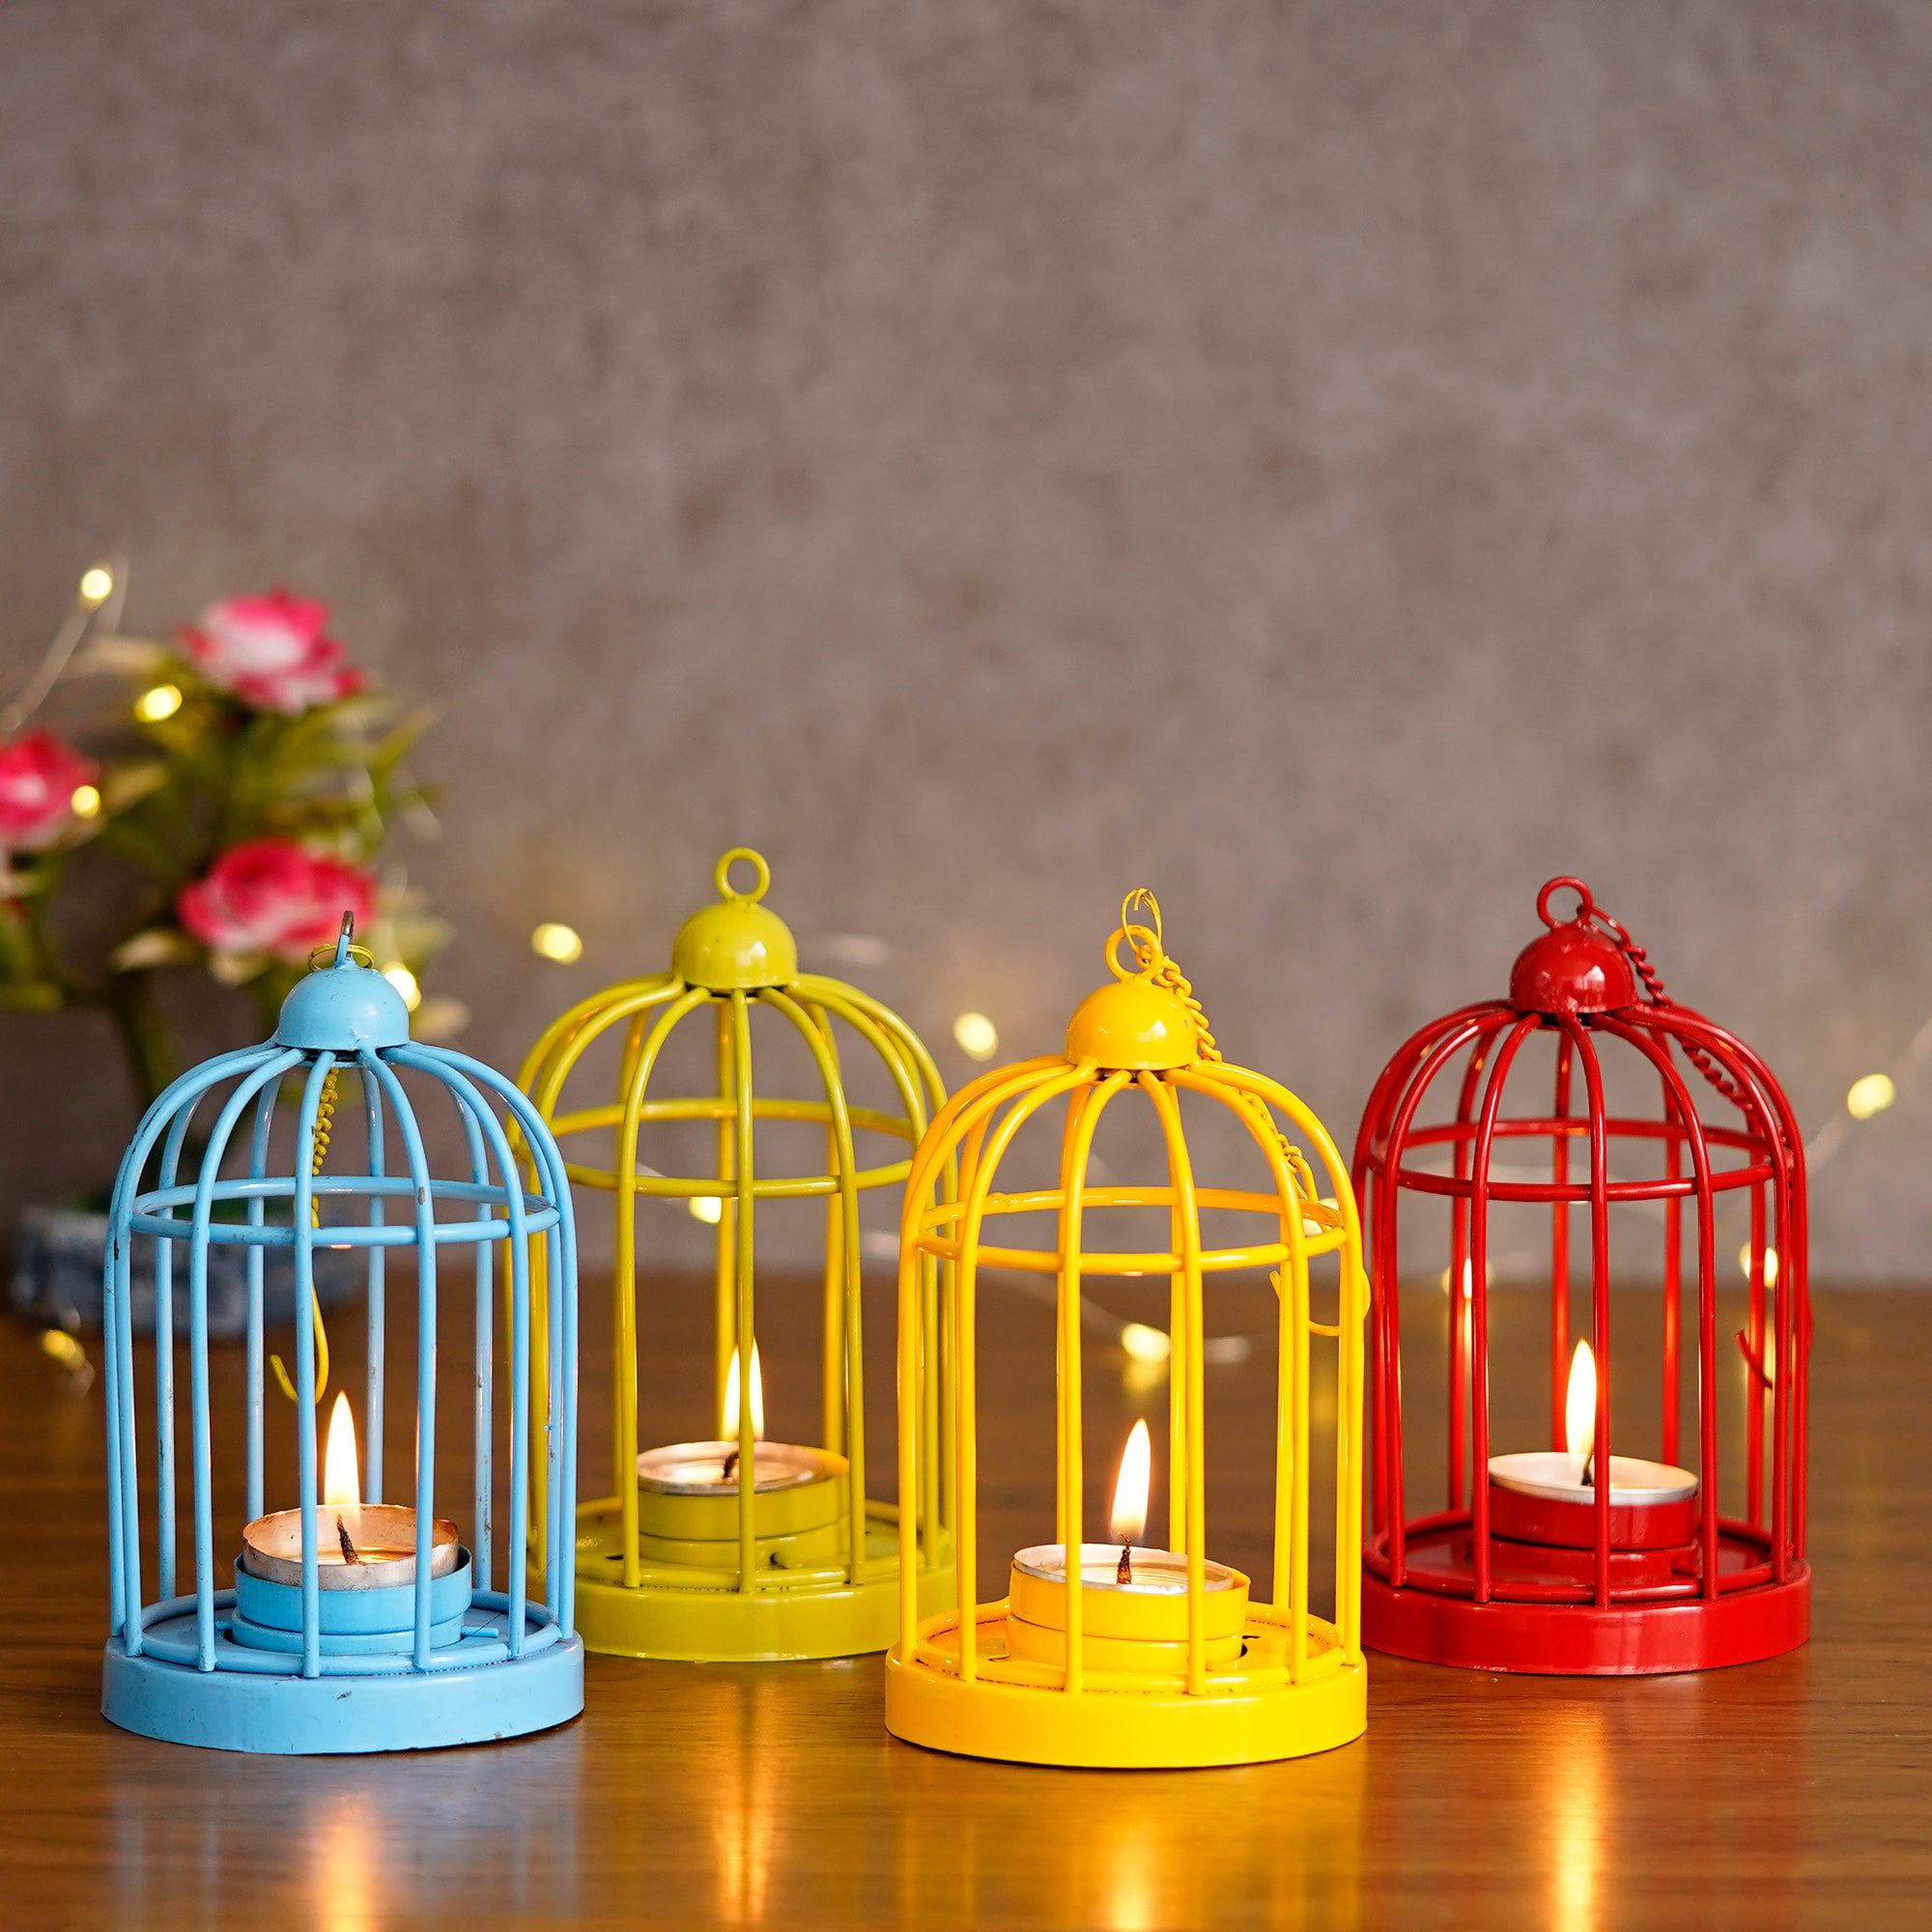 Set of 4 Colors Iron Cage Tea Light candle Holder With Hanging Chain(Blue, Green, Yellow, Red)